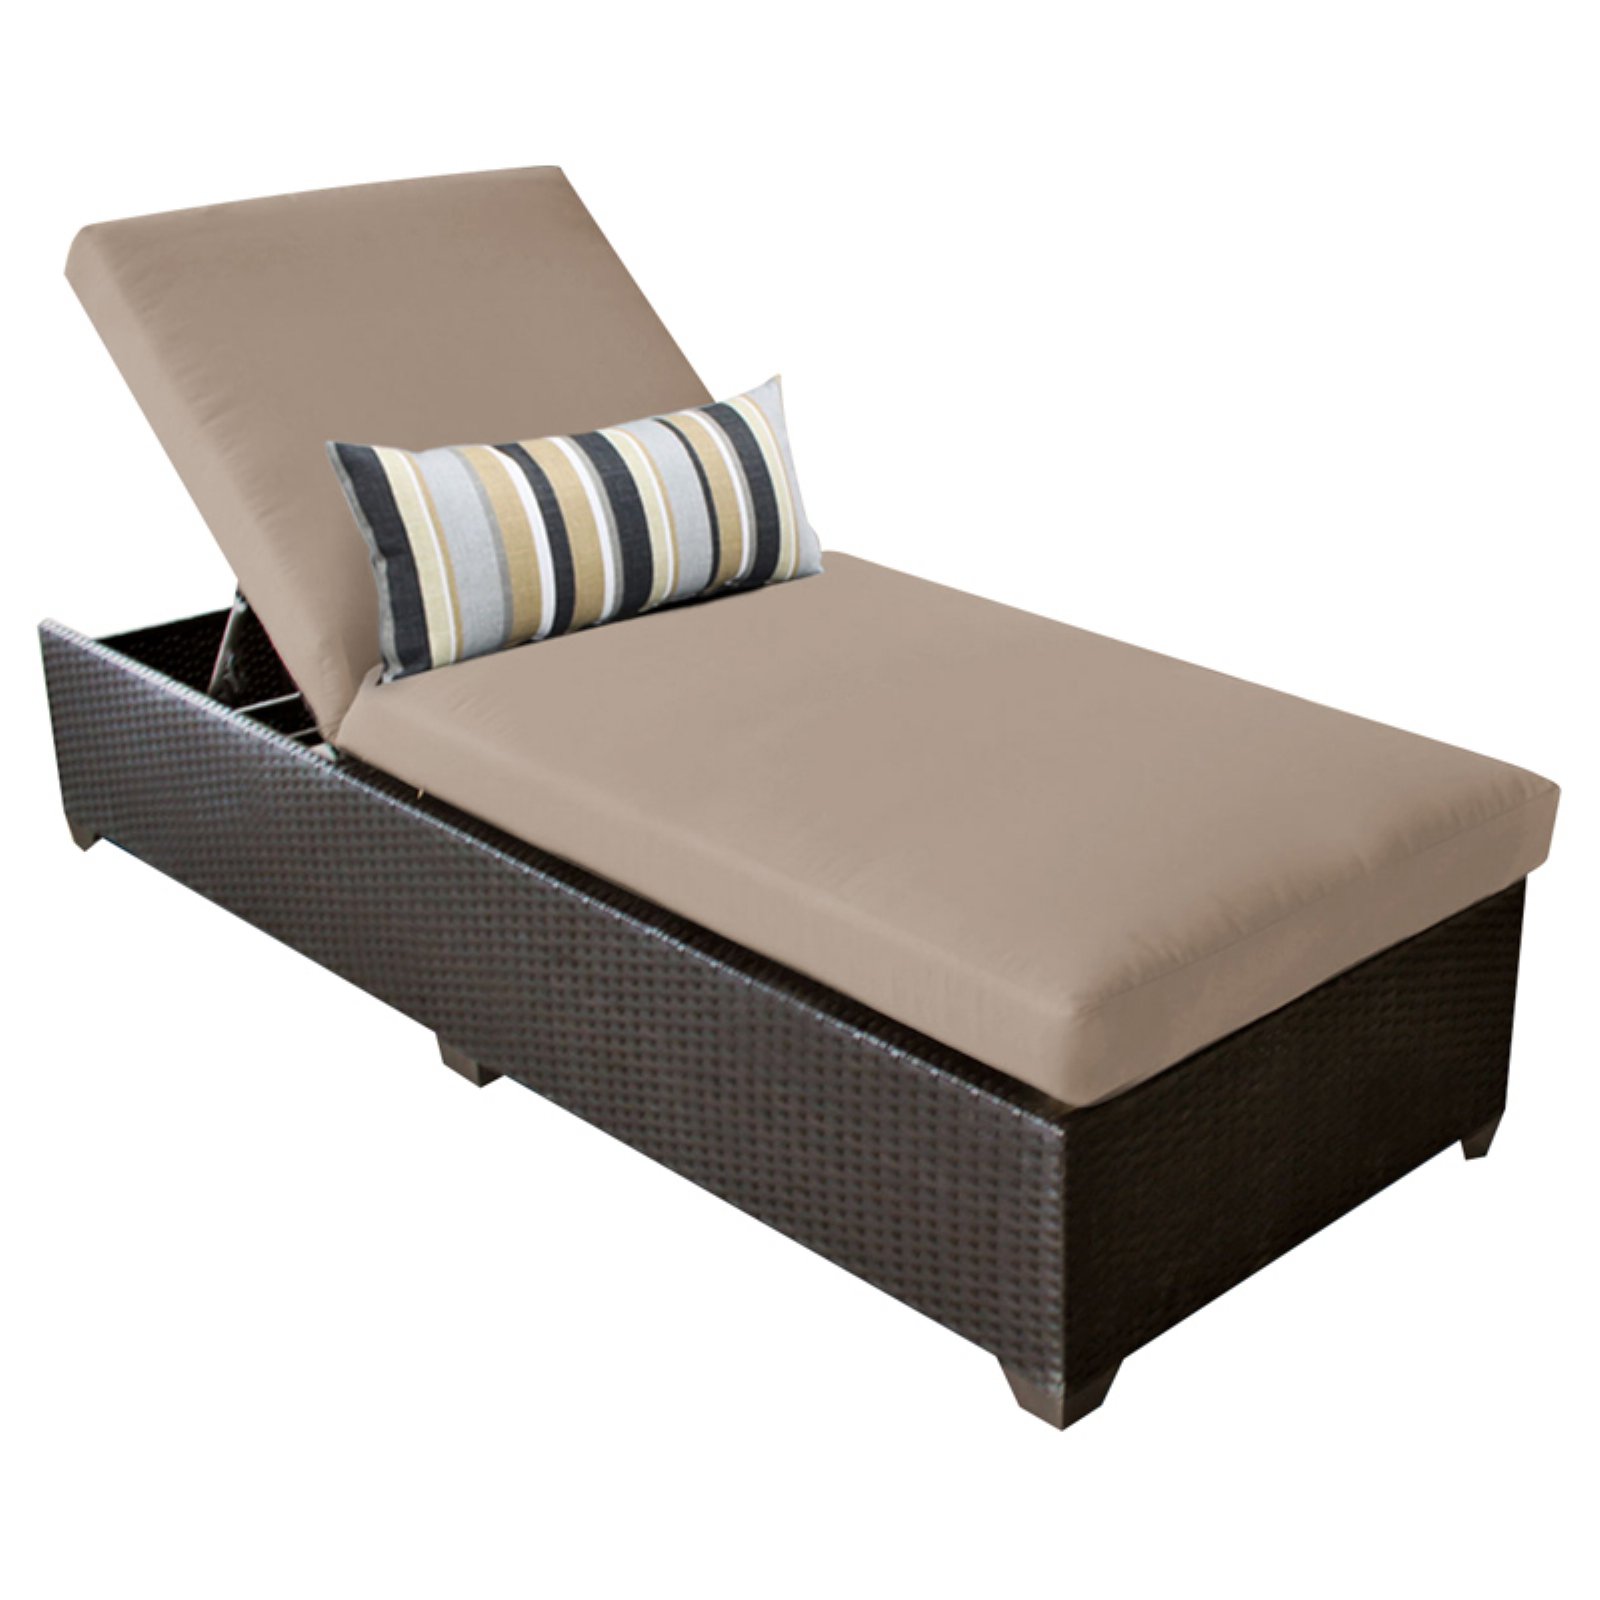 TK Classics Barbados Wicker Patio Chaise Lounge with Optional Side Table - image 2 of 10